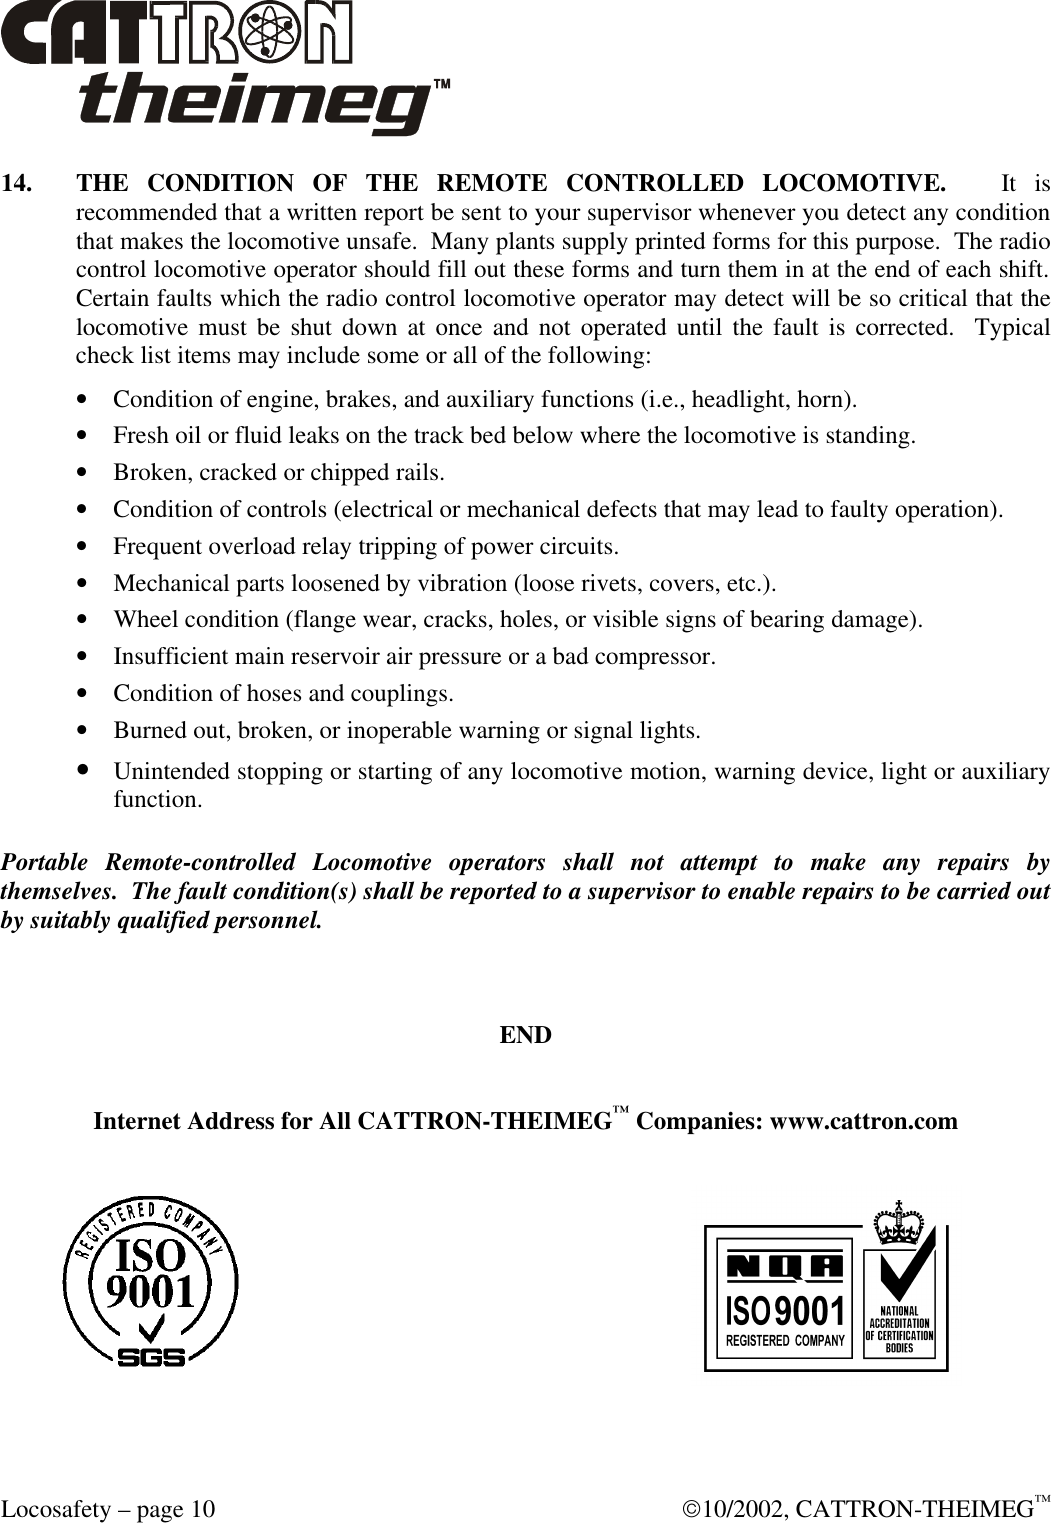  Locosafety – page 10  10/2002, CATTRON-THEIMEG™ 14. THE CONDITION OF THE REMOTE CONTROLLED LOCOMOTIVE.   It is recommended that a written report be sent to your supervisor whenever you detect any condition that makes the locomotive unsafe.  Many plants supply printed forms for this purpose.  The radio control locomotive operator should fill out these forms and turn them in at the end of each shift.  Certain faults which the radio control locomotive operator may detect will be so critical that the locomotive must be shut down at once and not operated until the fault is corrected.  Typical check list items may include some or all of the following: • Condition of engine, brakes, and auxiliary functions (i.e., headlight, horn). • Fresh oil or fluid leaks on the track bed below where the locomotive is standing. • Broken, cracked or chipped rails. • Condition of controls (electrical or mechanical defects that may lead to faulty operation). • Frequent overload relay tripping of power circuits. • Mechanical parts loosened by vibration (loose rivets, covers, etc.). • Wheel condition (flange wear, cracks, holes, or visible signs of bearing damage). • Insufficient main reservoir air pressure or a bad compressor. • Condition of hoses and couplings. • Burned out, broken, or inoperable warning or signal lights. • Unintended stopping or starting of any locomotive motion, warning device, light or auxiliary function.  Portable Remote-controlled Locomotive operators shall not attempt to make any repairs by themselves.  The fault condition(s) shall be reported to a supervisor to enable repairs to be carried out by suitably qualified personnel.    END   Internet Address for All CATTRON-THEIMEG™ Companies: www.cattron.com    